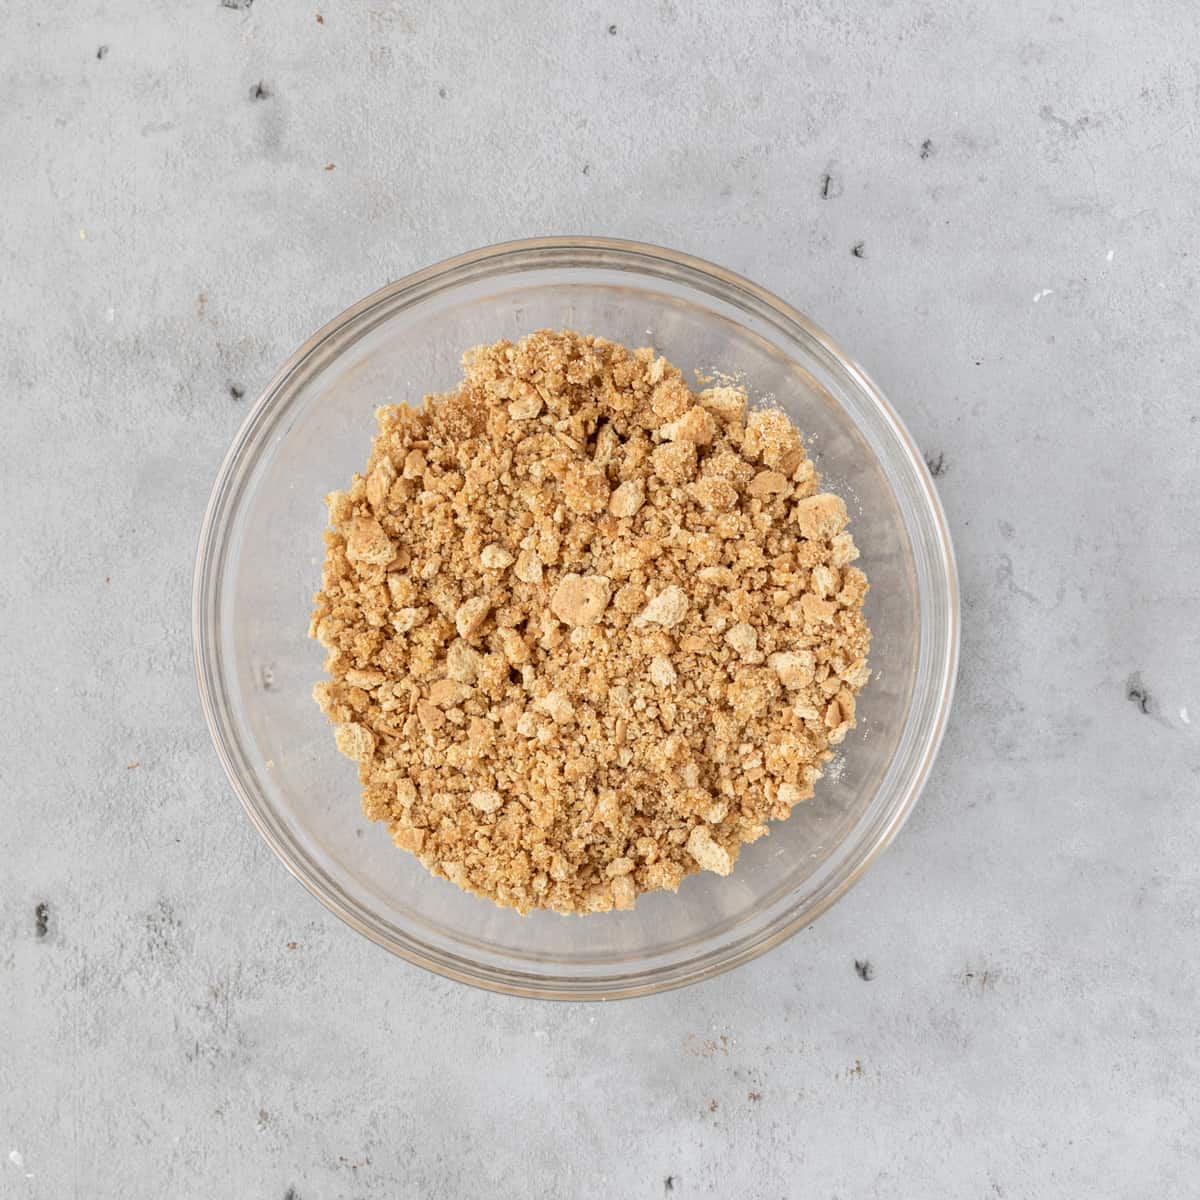 the graham cracker crust in a glass bowl on a grey background.